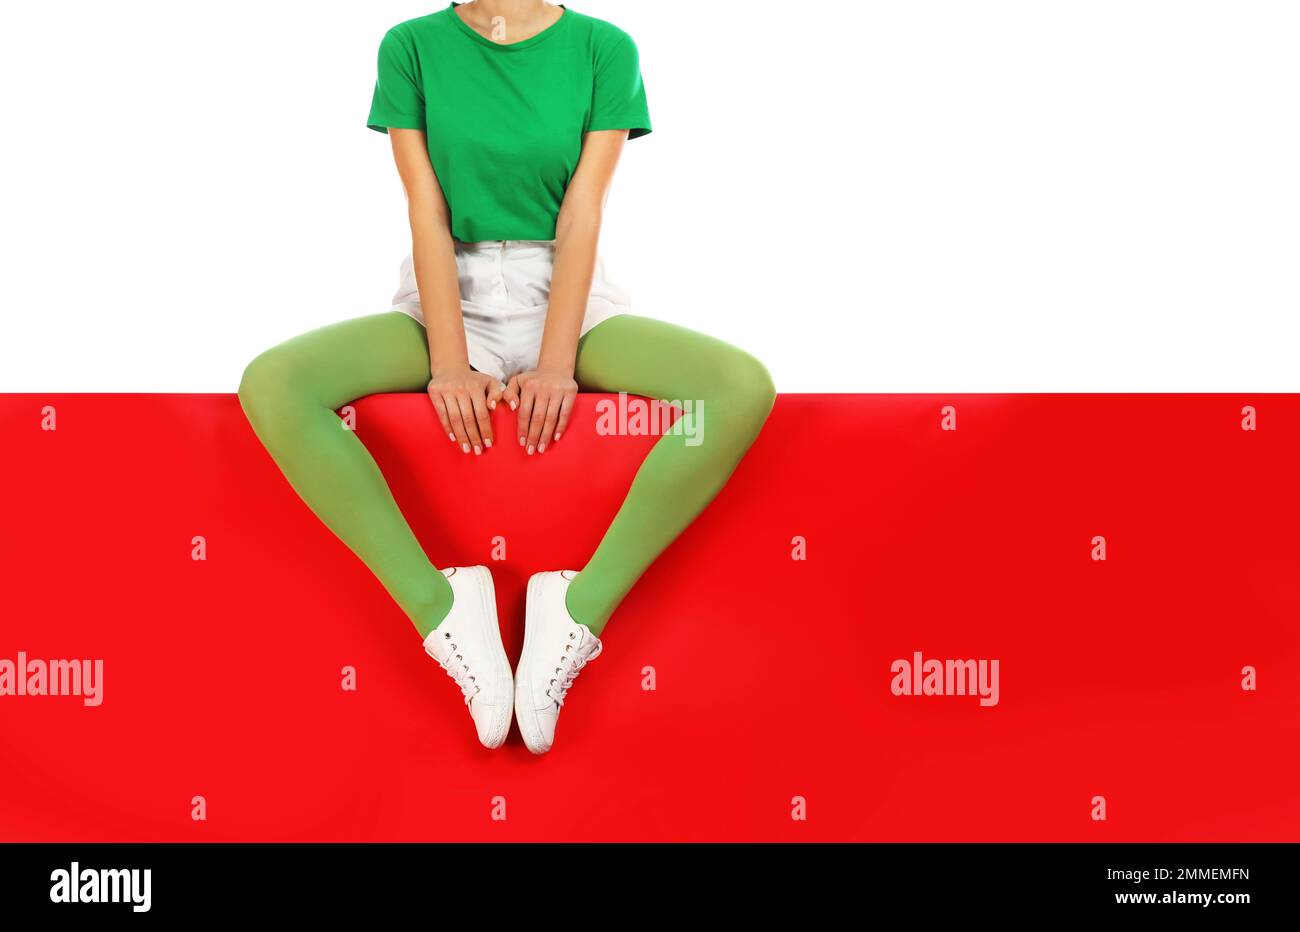 https://c8.alamy.com/comp/2MMEMFN/woman-wearing-green-tights-sitting-on-color-background-closeup-space-for-text-2MMEMFN.jpg